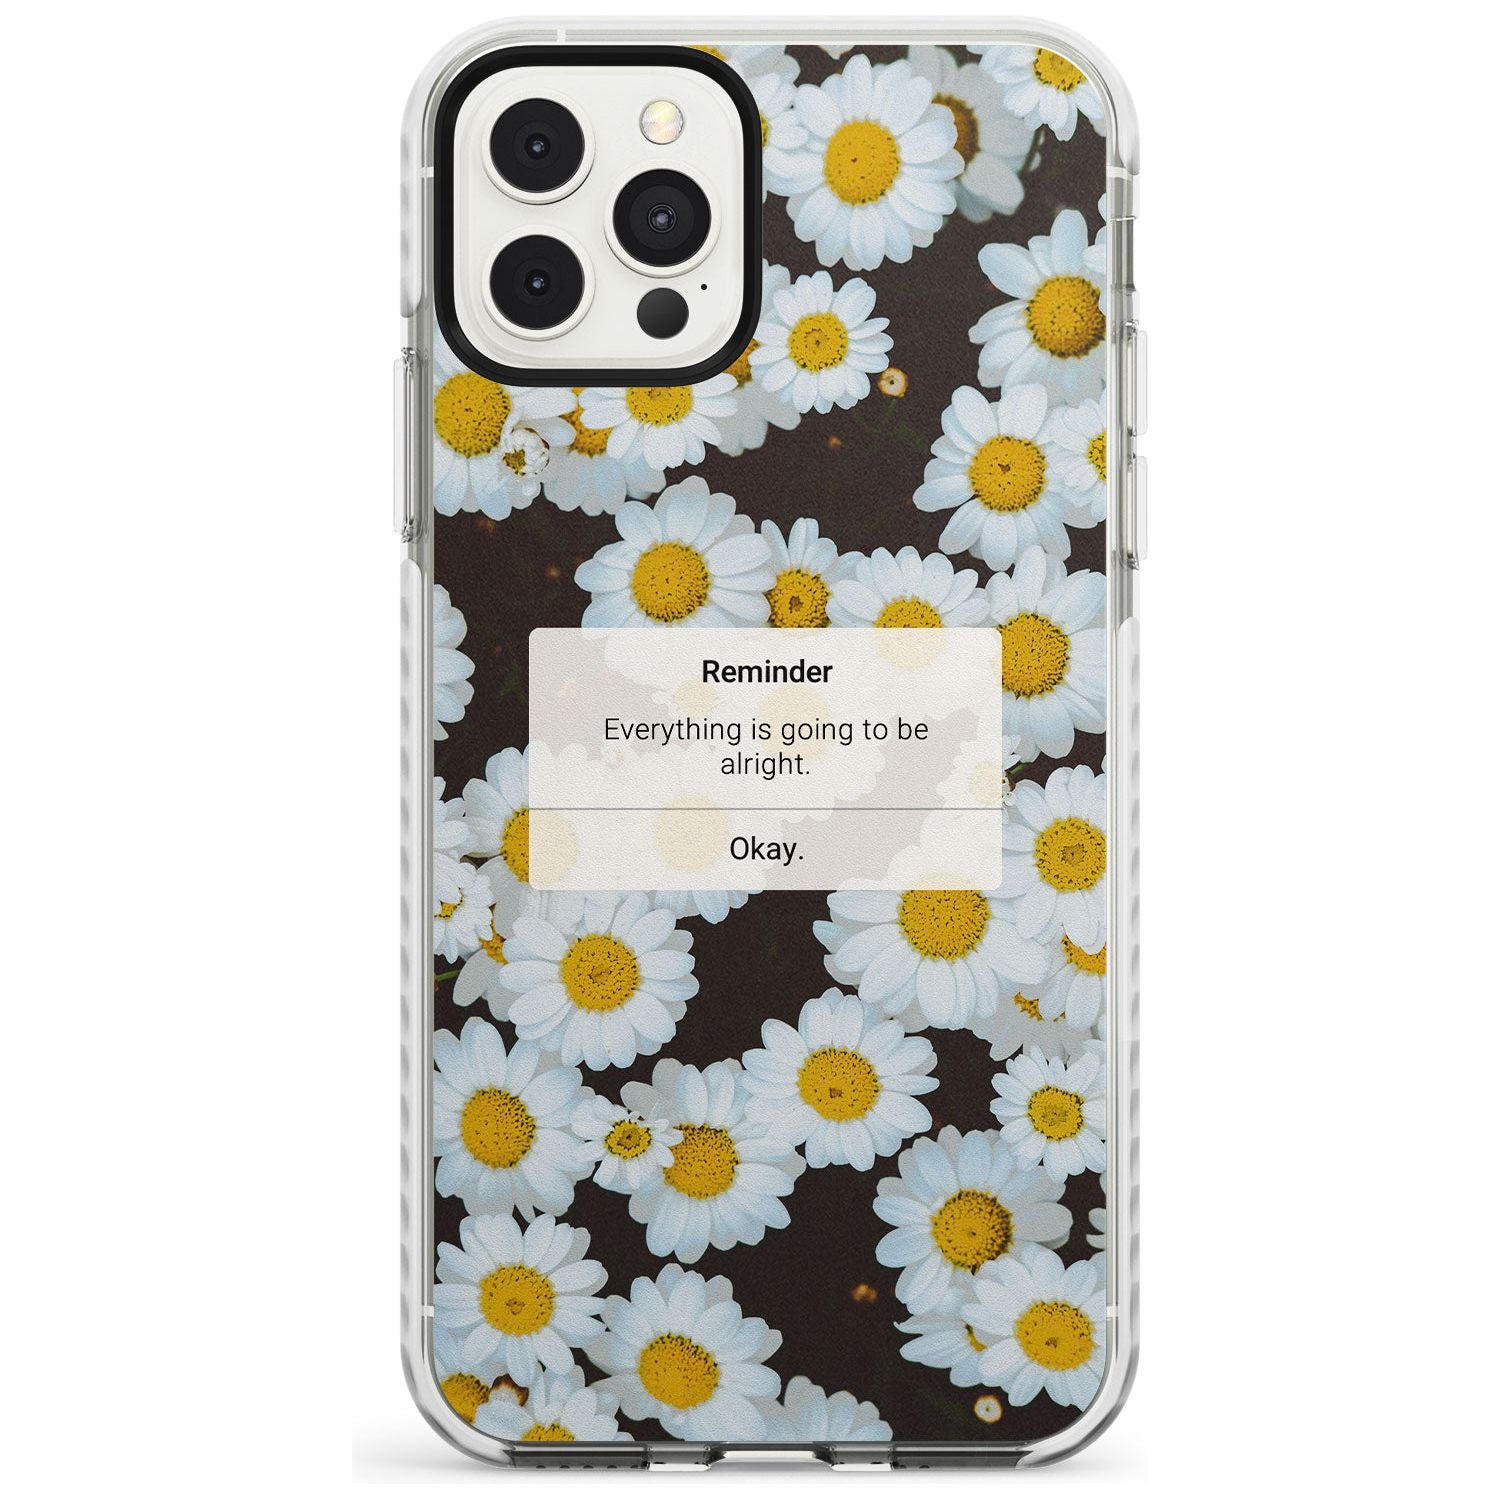 "Everything will be alright" iPhone Reminder Slim TPU Phone Case for iPhone 11 Pro Max